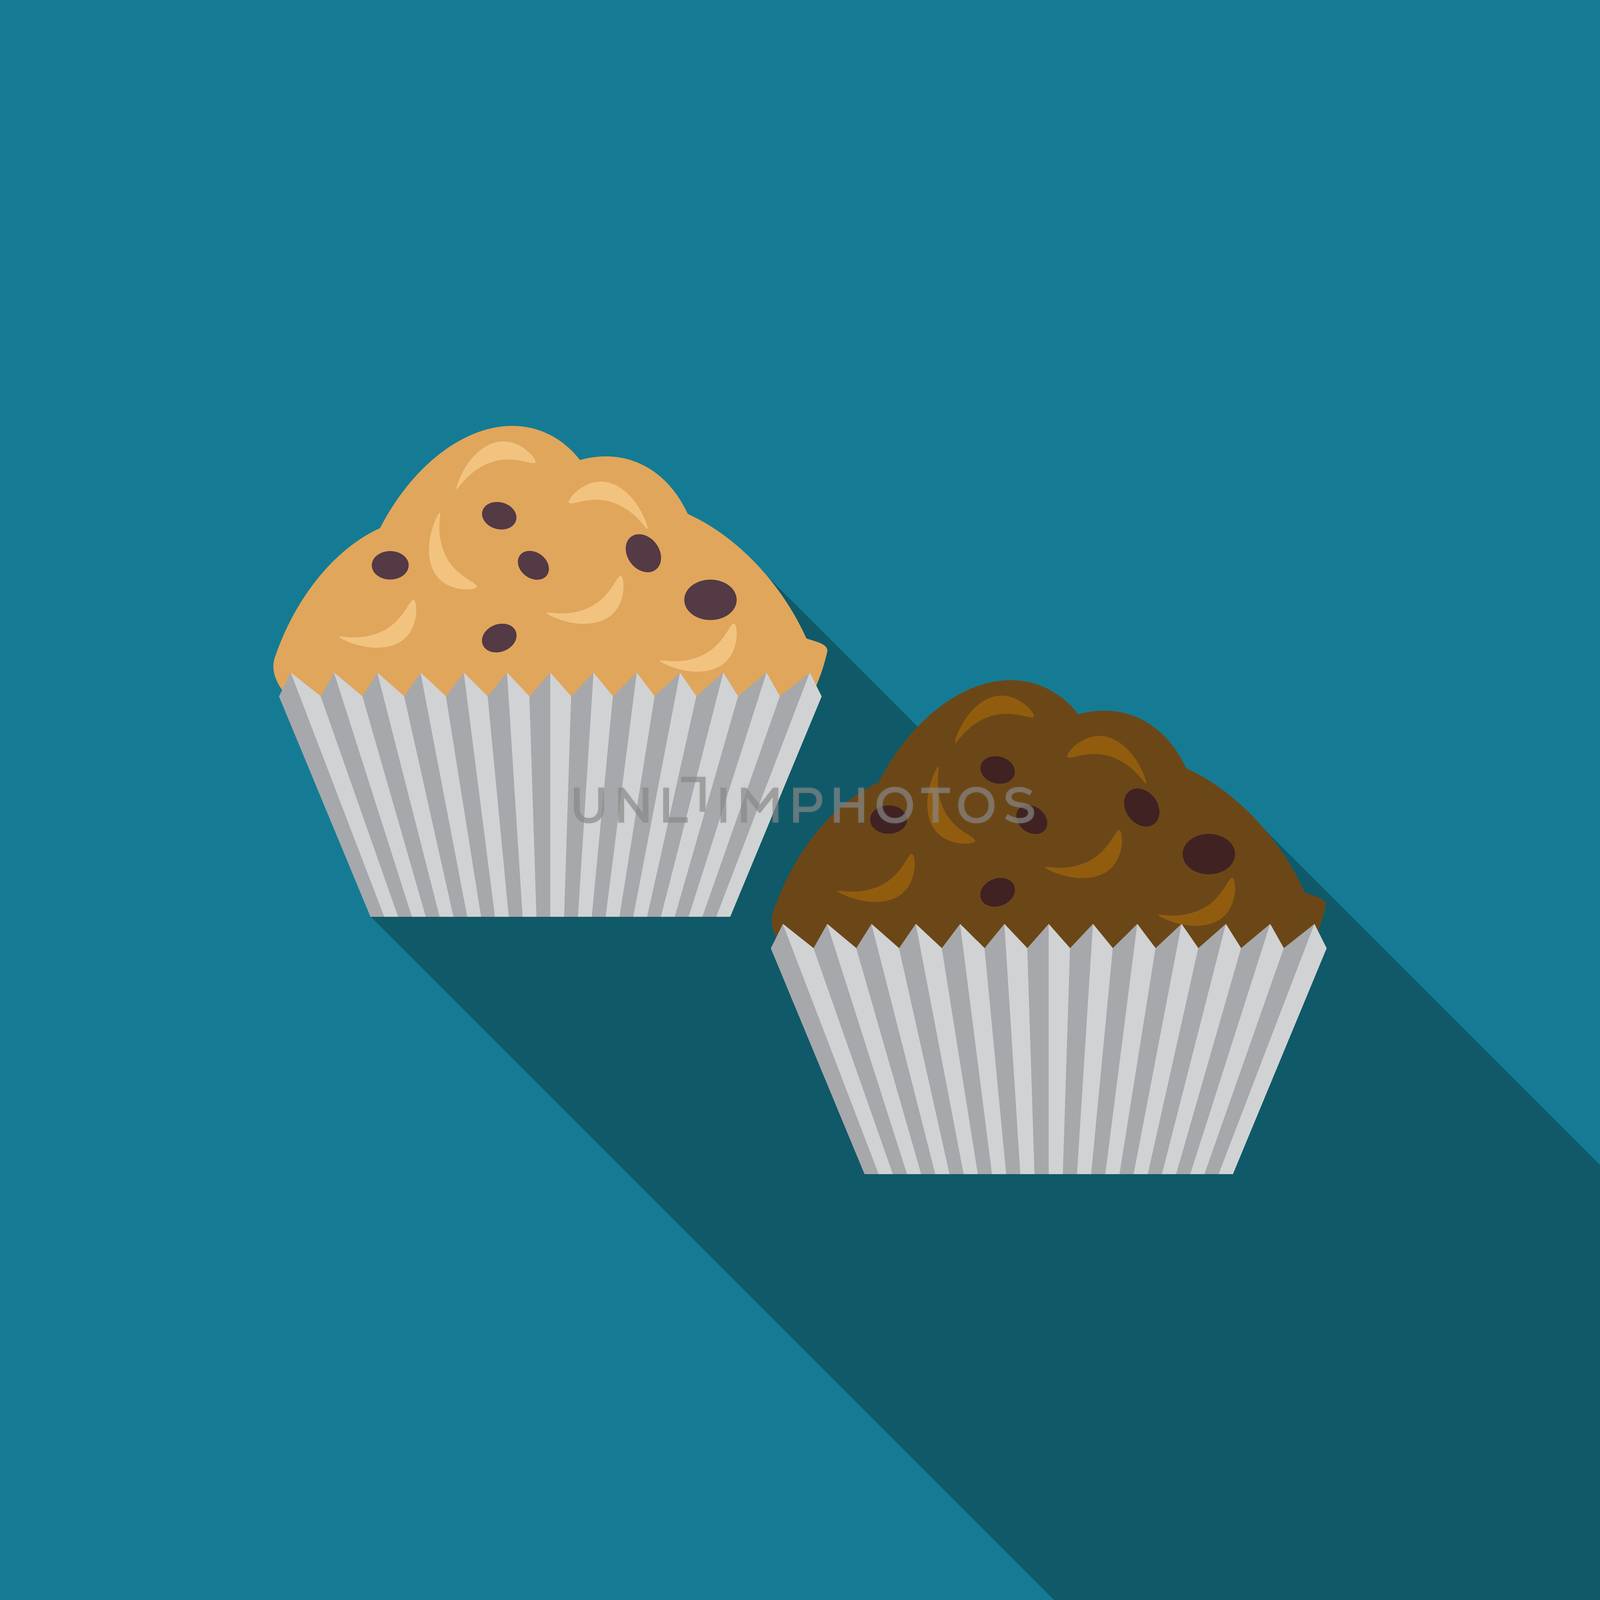 Flat design vector muffins icon with long shadow